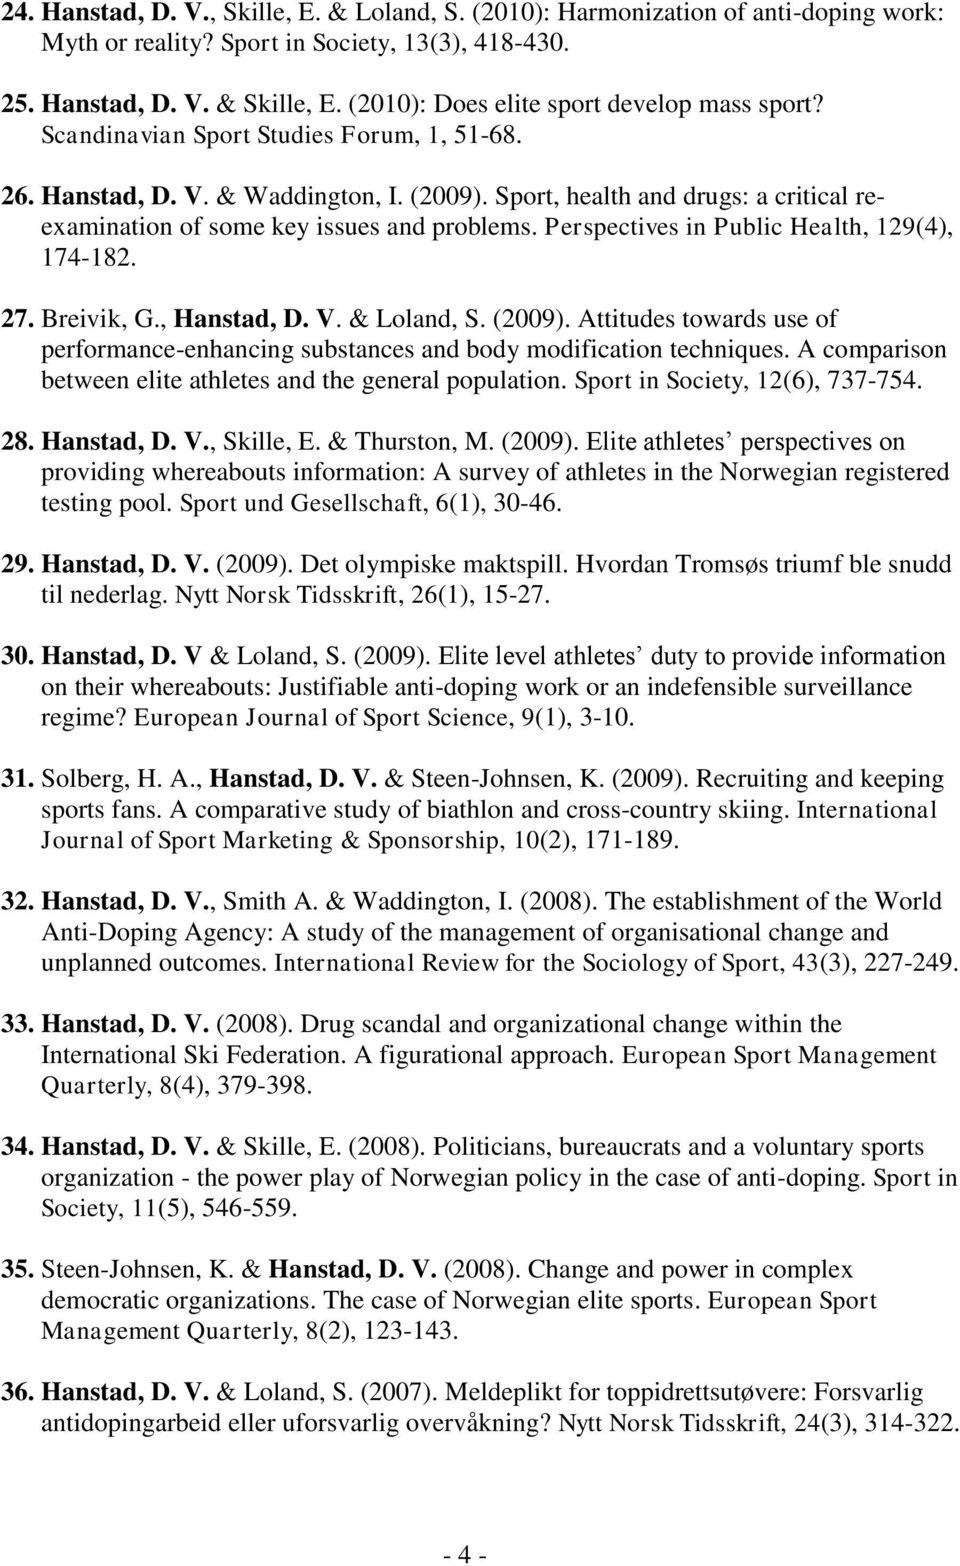 Sport, health and drugs: a critical reexamination of some key issues and problems. Perspectives in Public Health, 129(4), 174-182. 27. Breivik, G., Hanstad, D. V. & Loland, S. (2009).